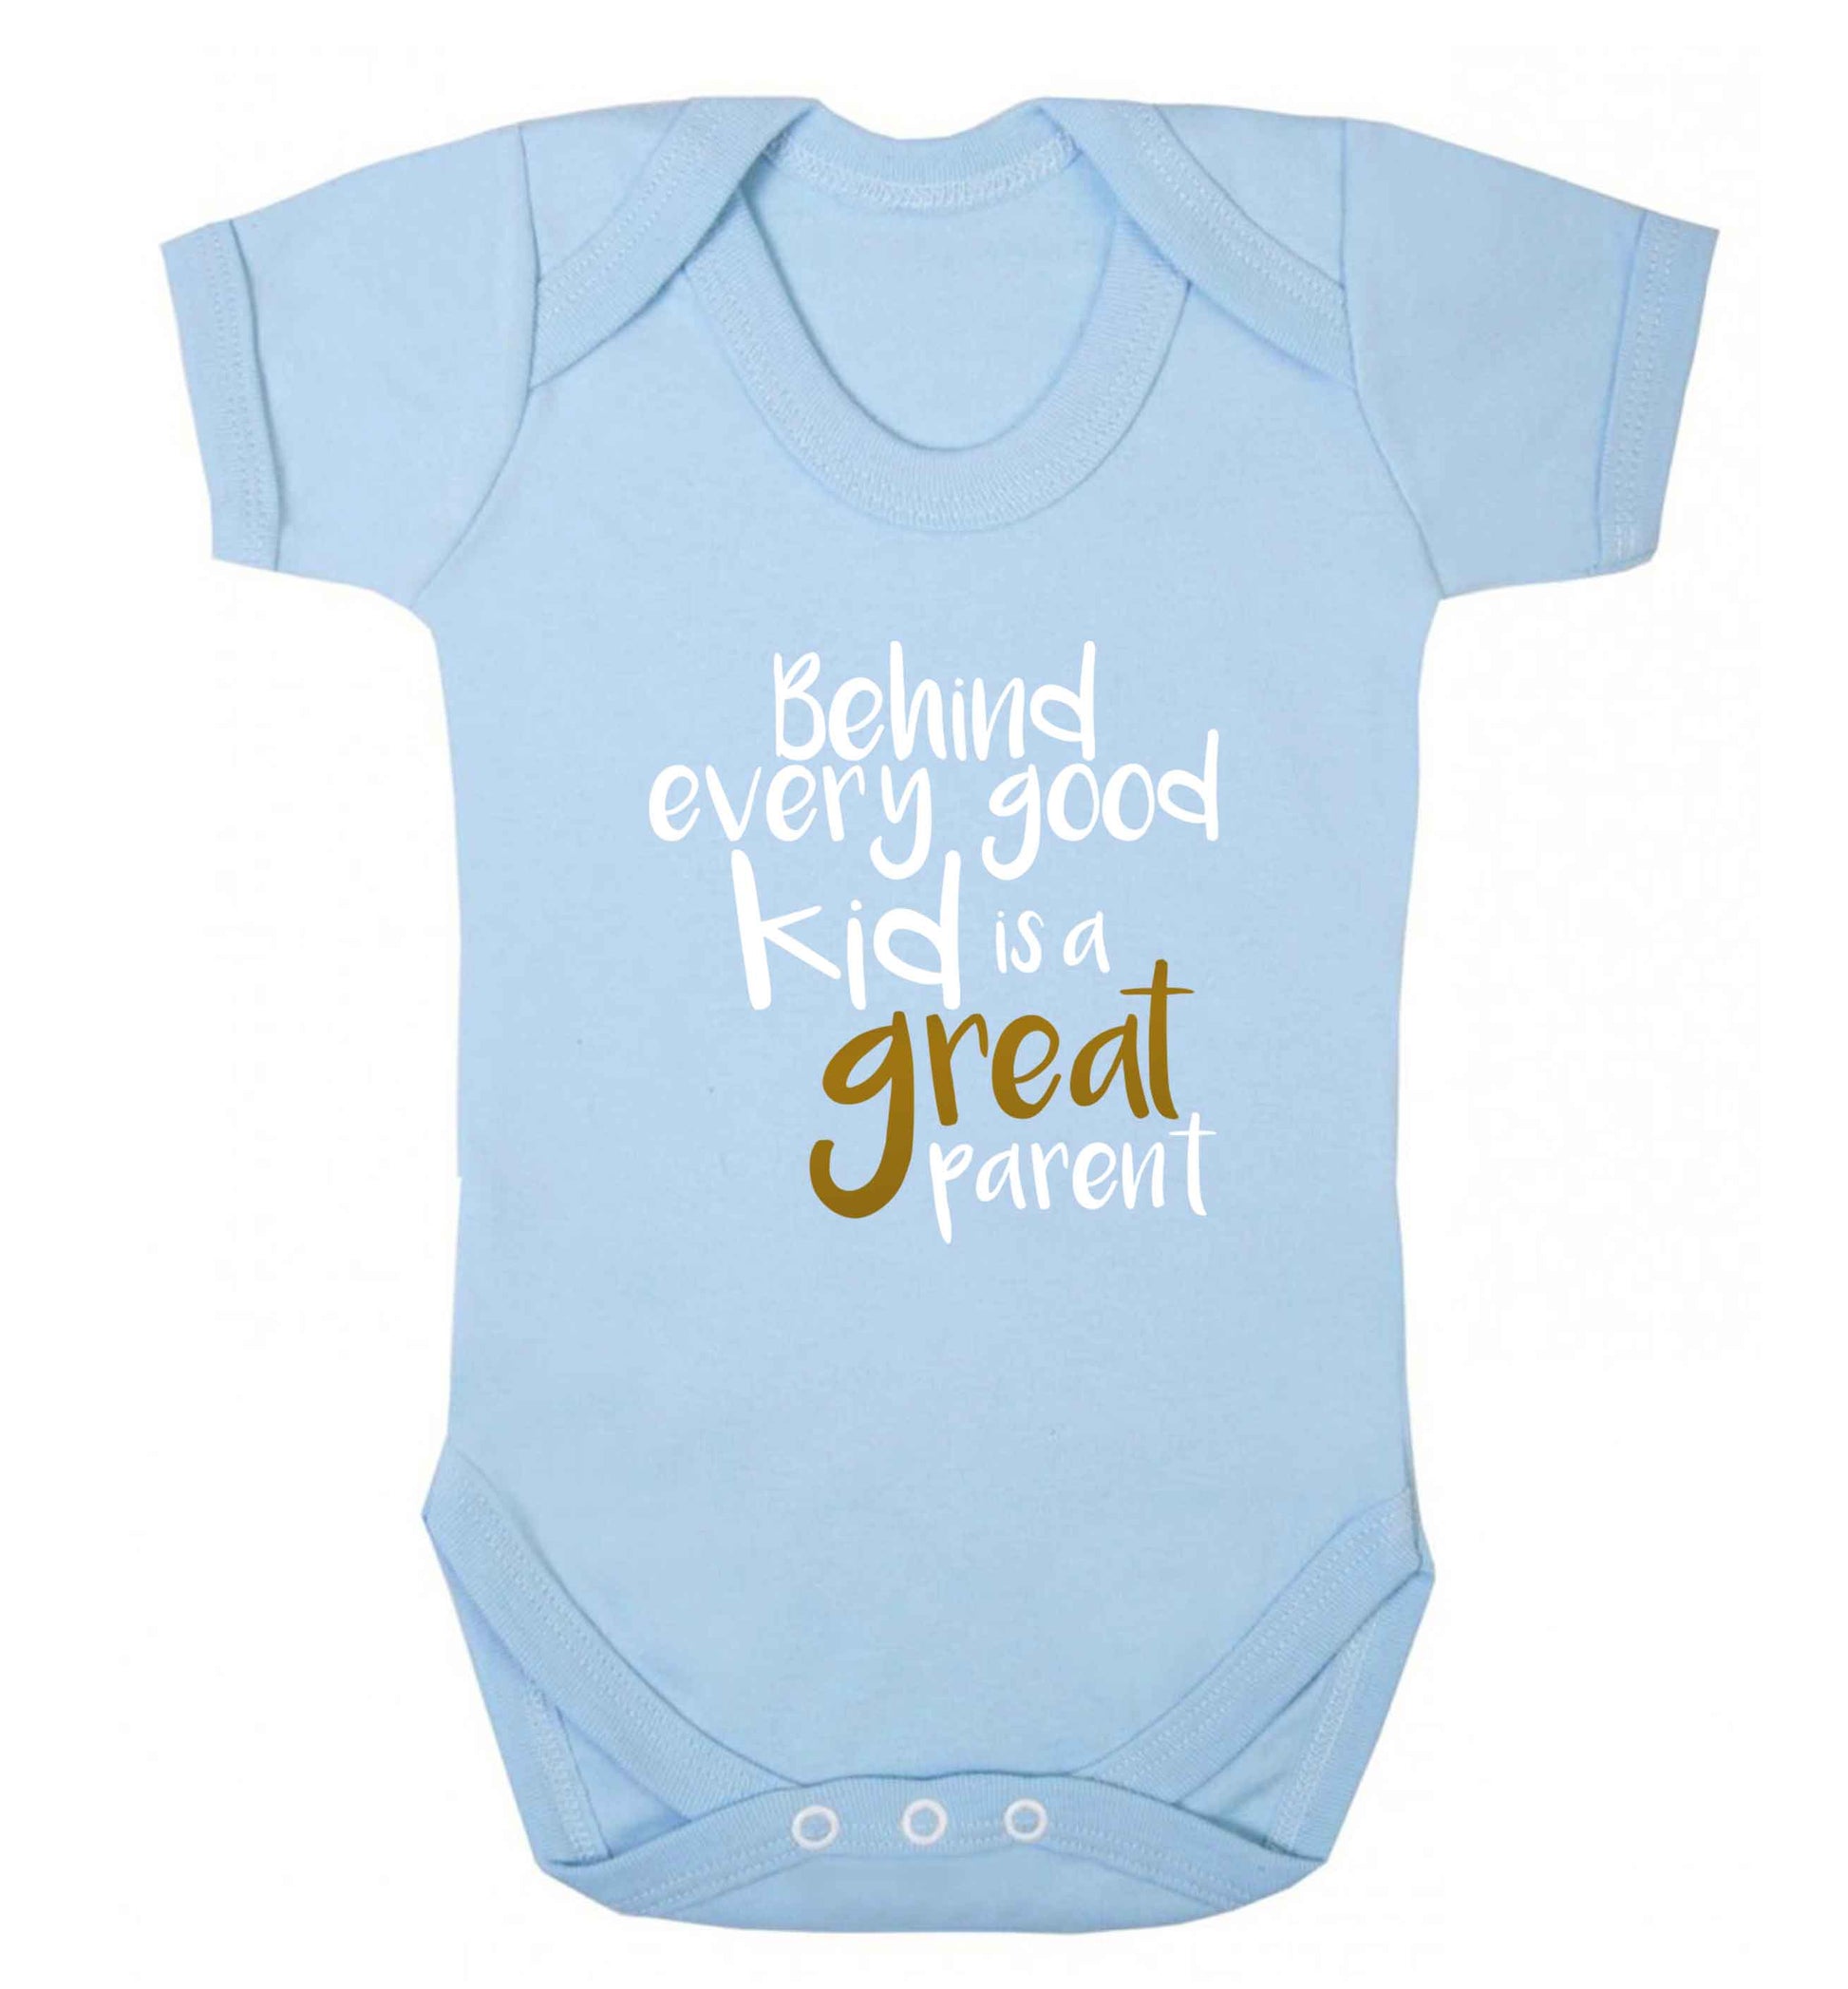 Behind every good kid is a great parent baby vest pale blue 18-24 months